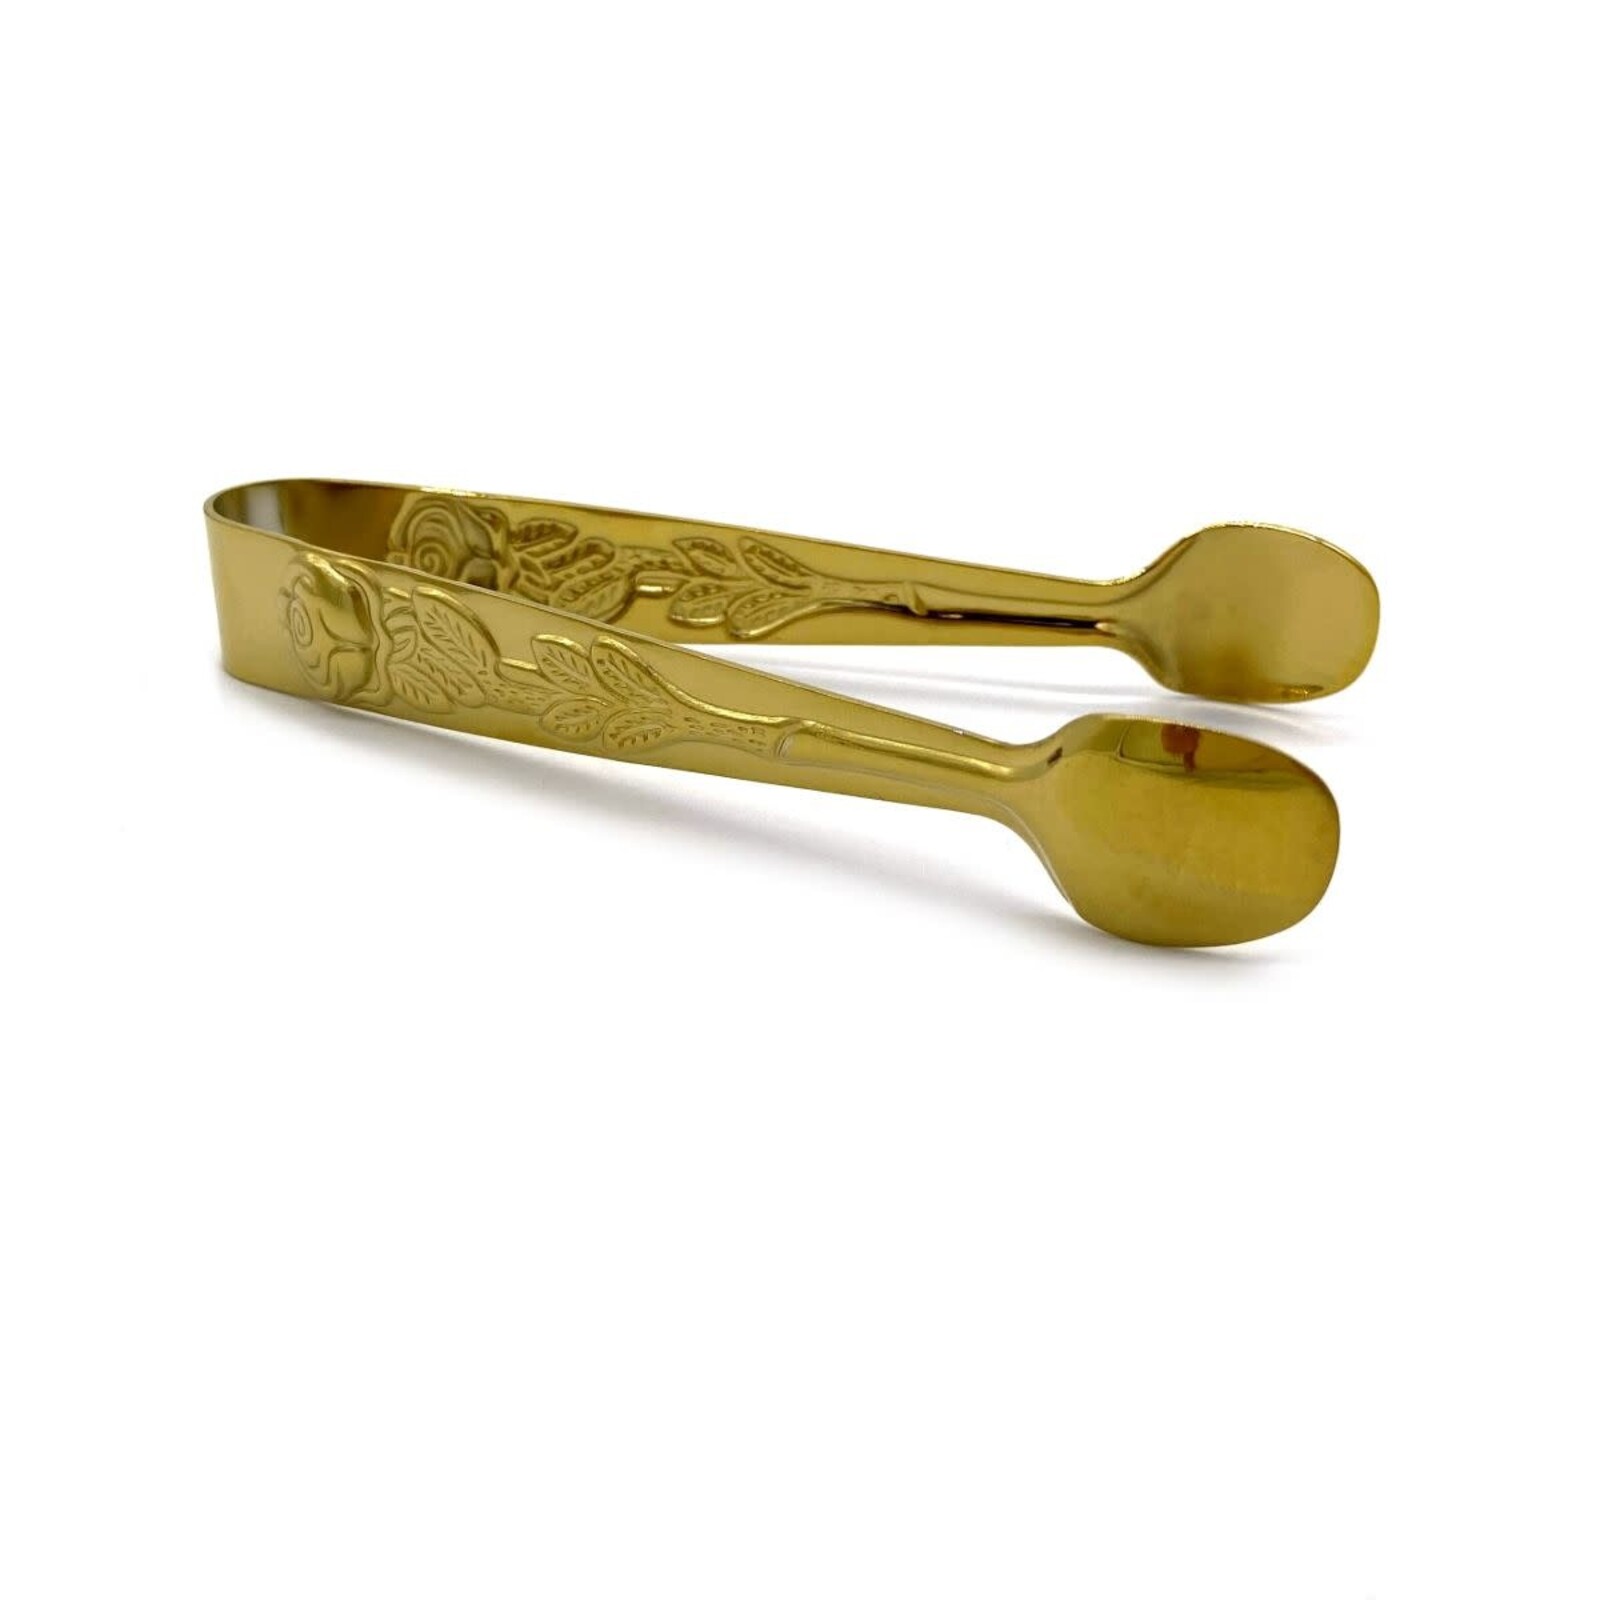 The Gallery Rose Handle Sugar Tong Stainless Steel Gold loading=